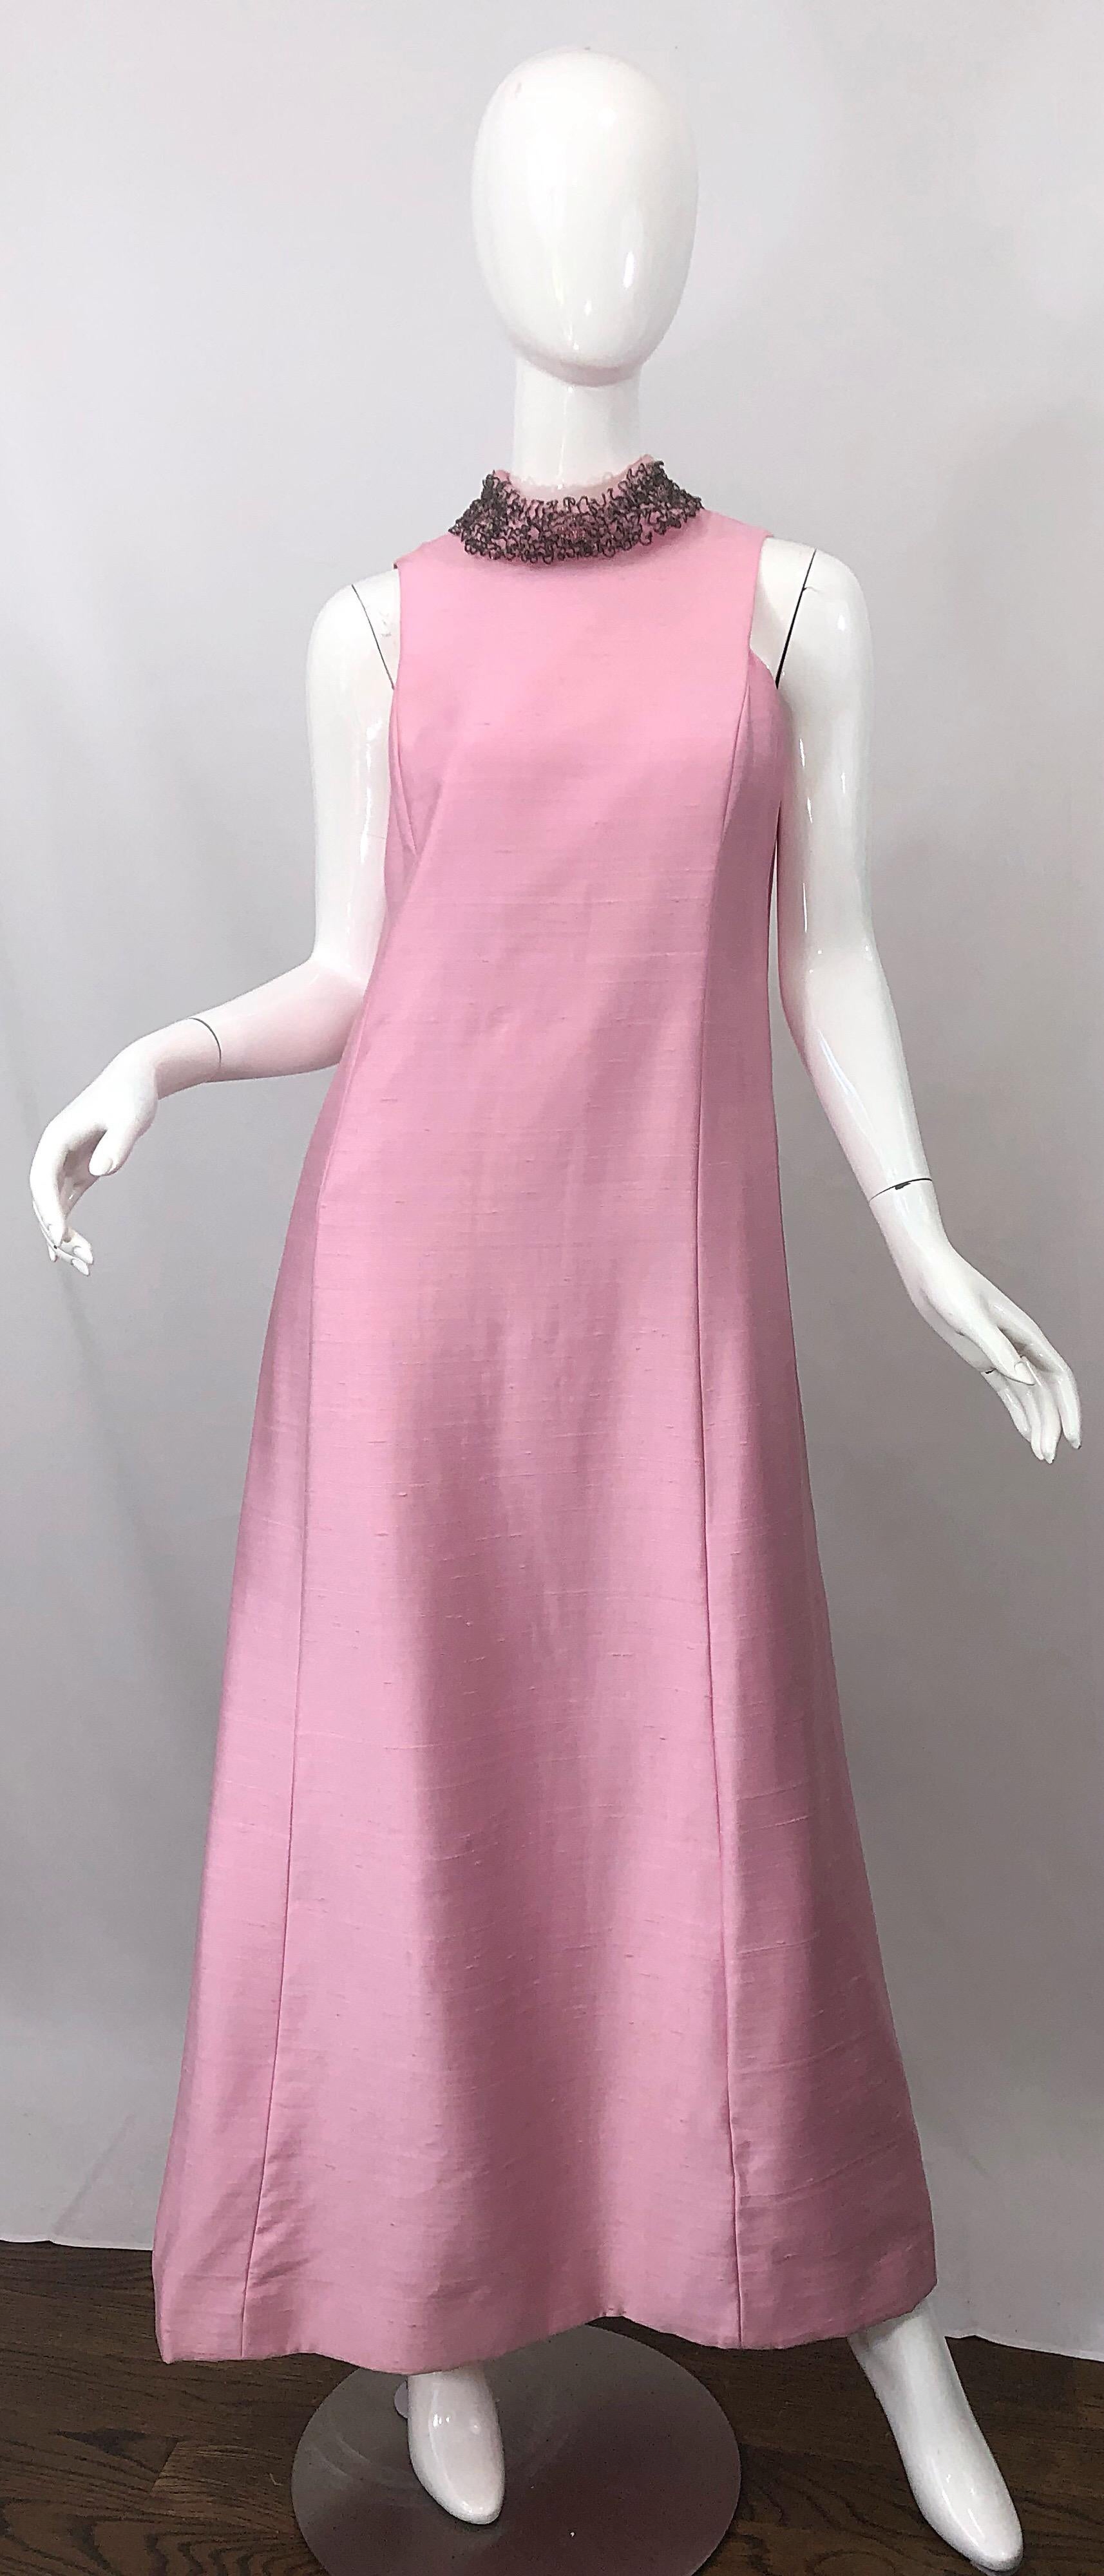 Beautiful 1960s SAKS 5th AVENUE light pink silk shantung beaded gown and jacket ensemble! Gown features a fitted bodice with a forgiving full skirt. Collar has hundreds of hand-sewn beads and rhinestones. Tailored jacket has four silk covered